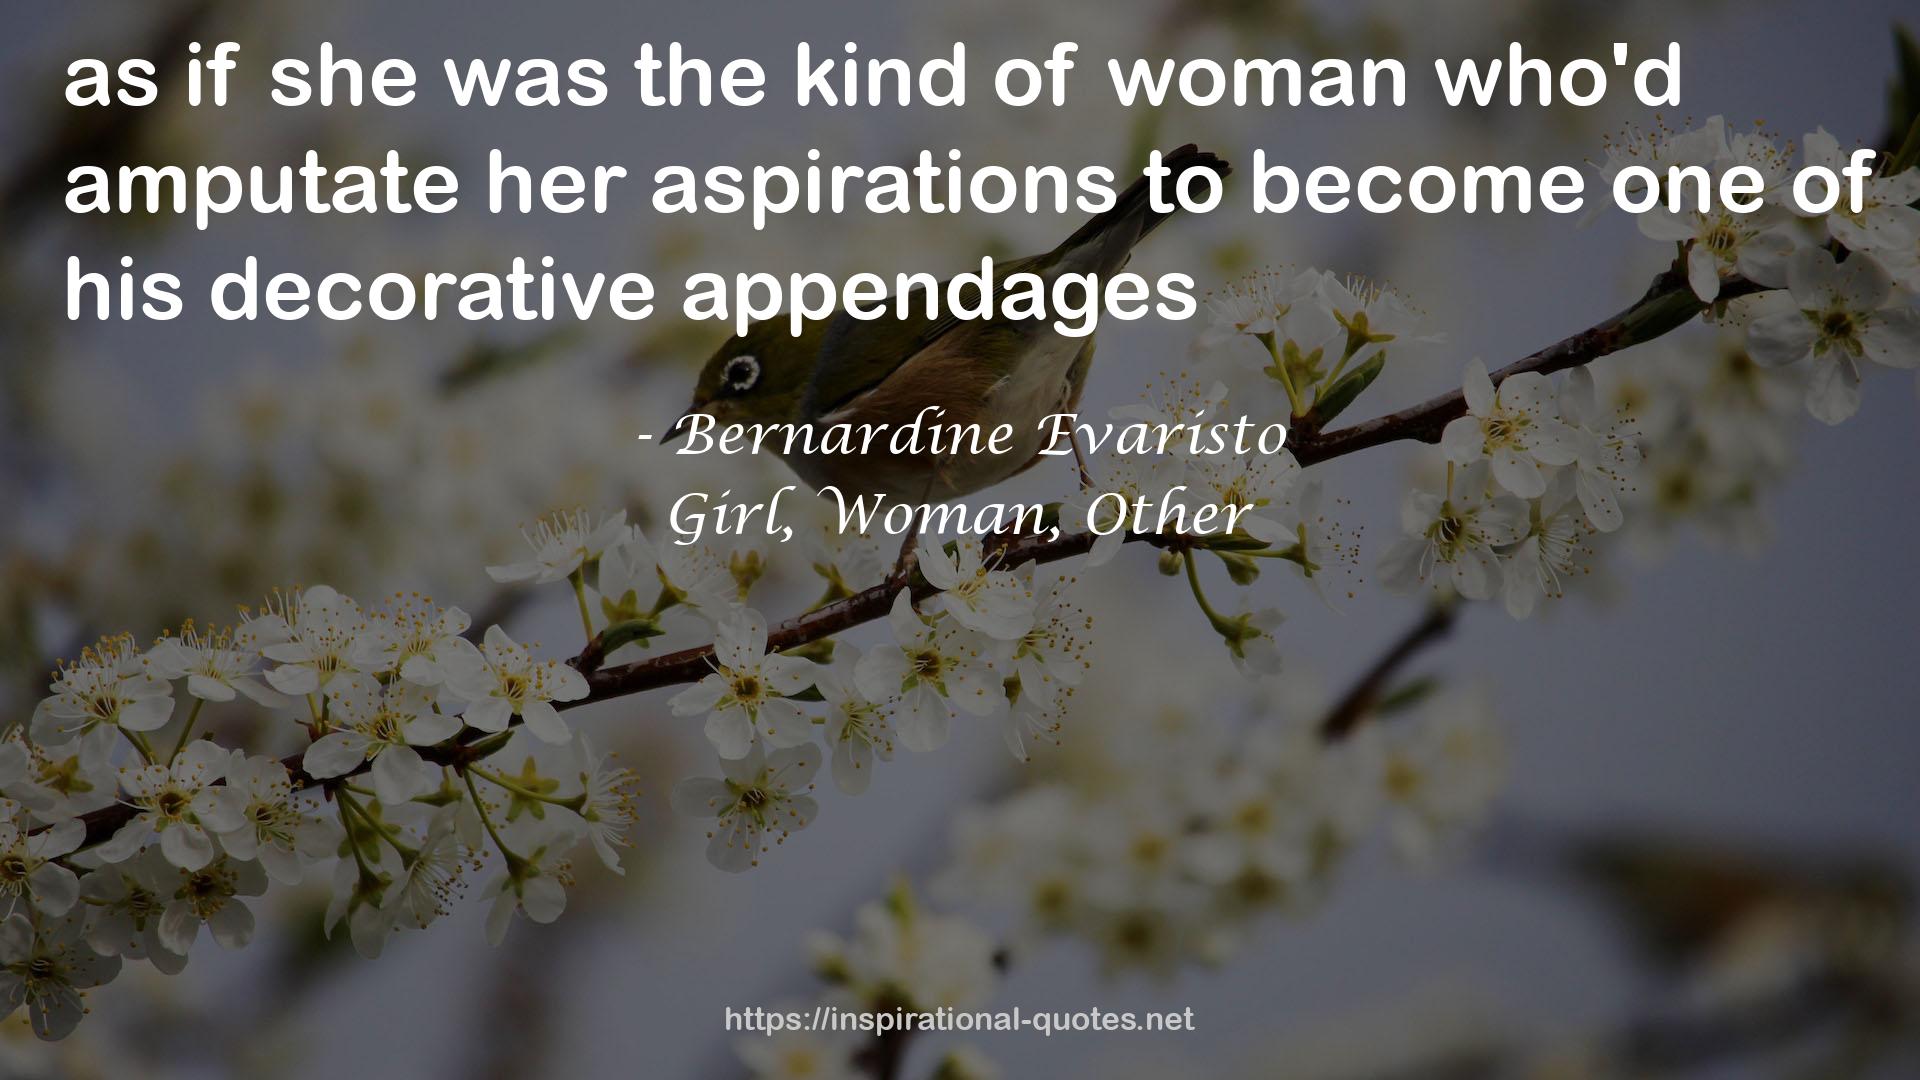 Girl, Woman, Other QUOTES